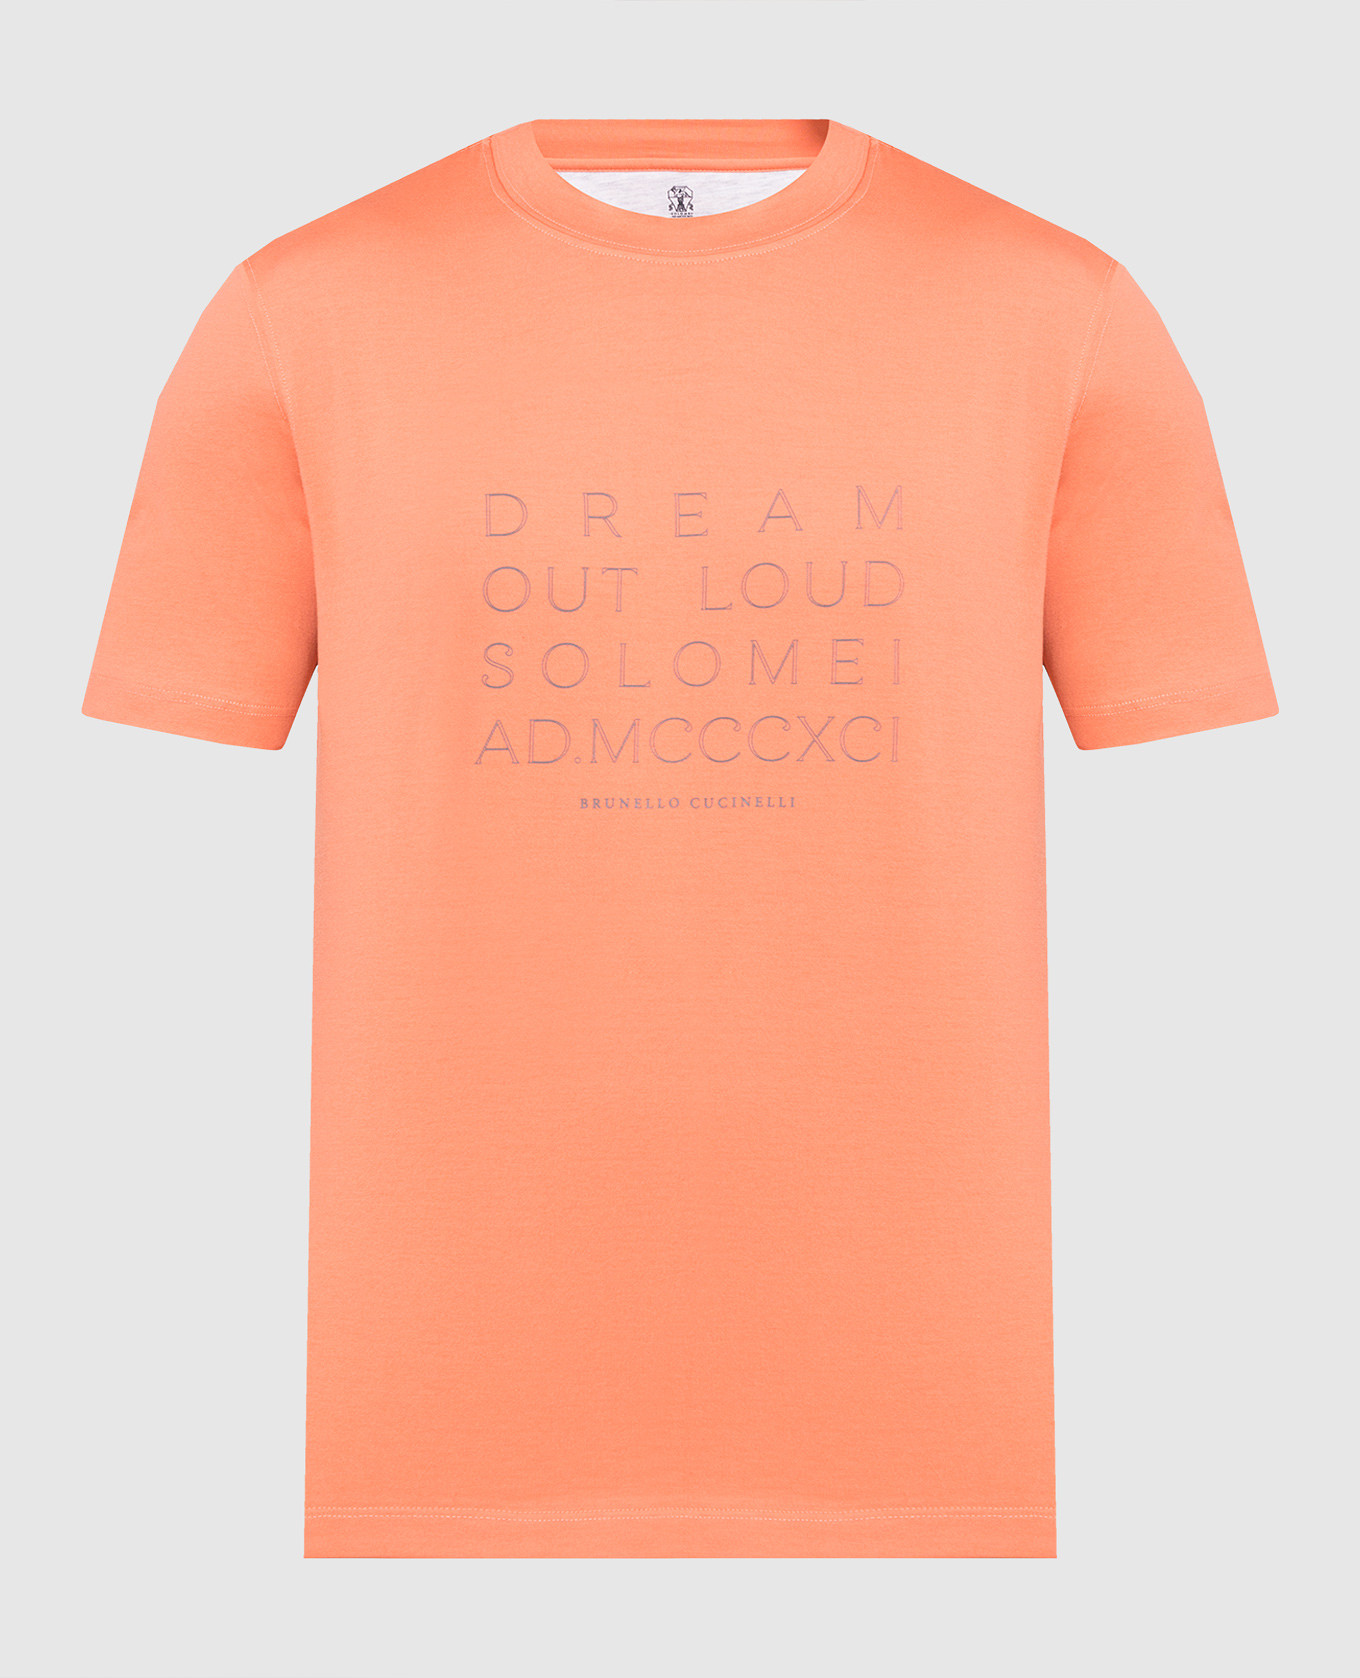 Orange t-shirt with Dream out loud print